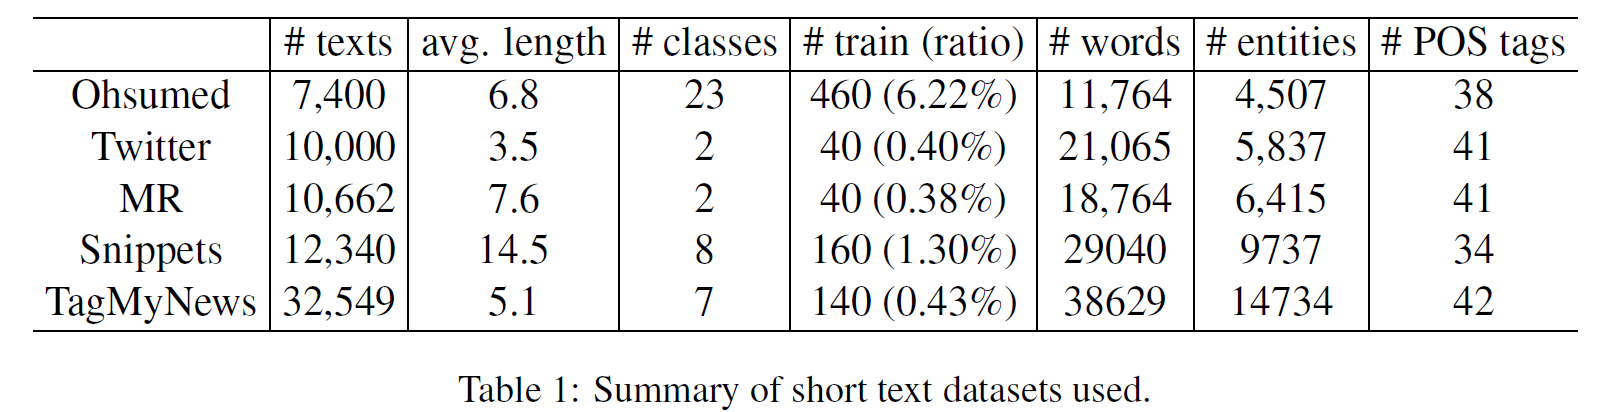 GNN NLP(15) Hierarchical Heterogeneous Graph Representation Learning for Short Text Classification